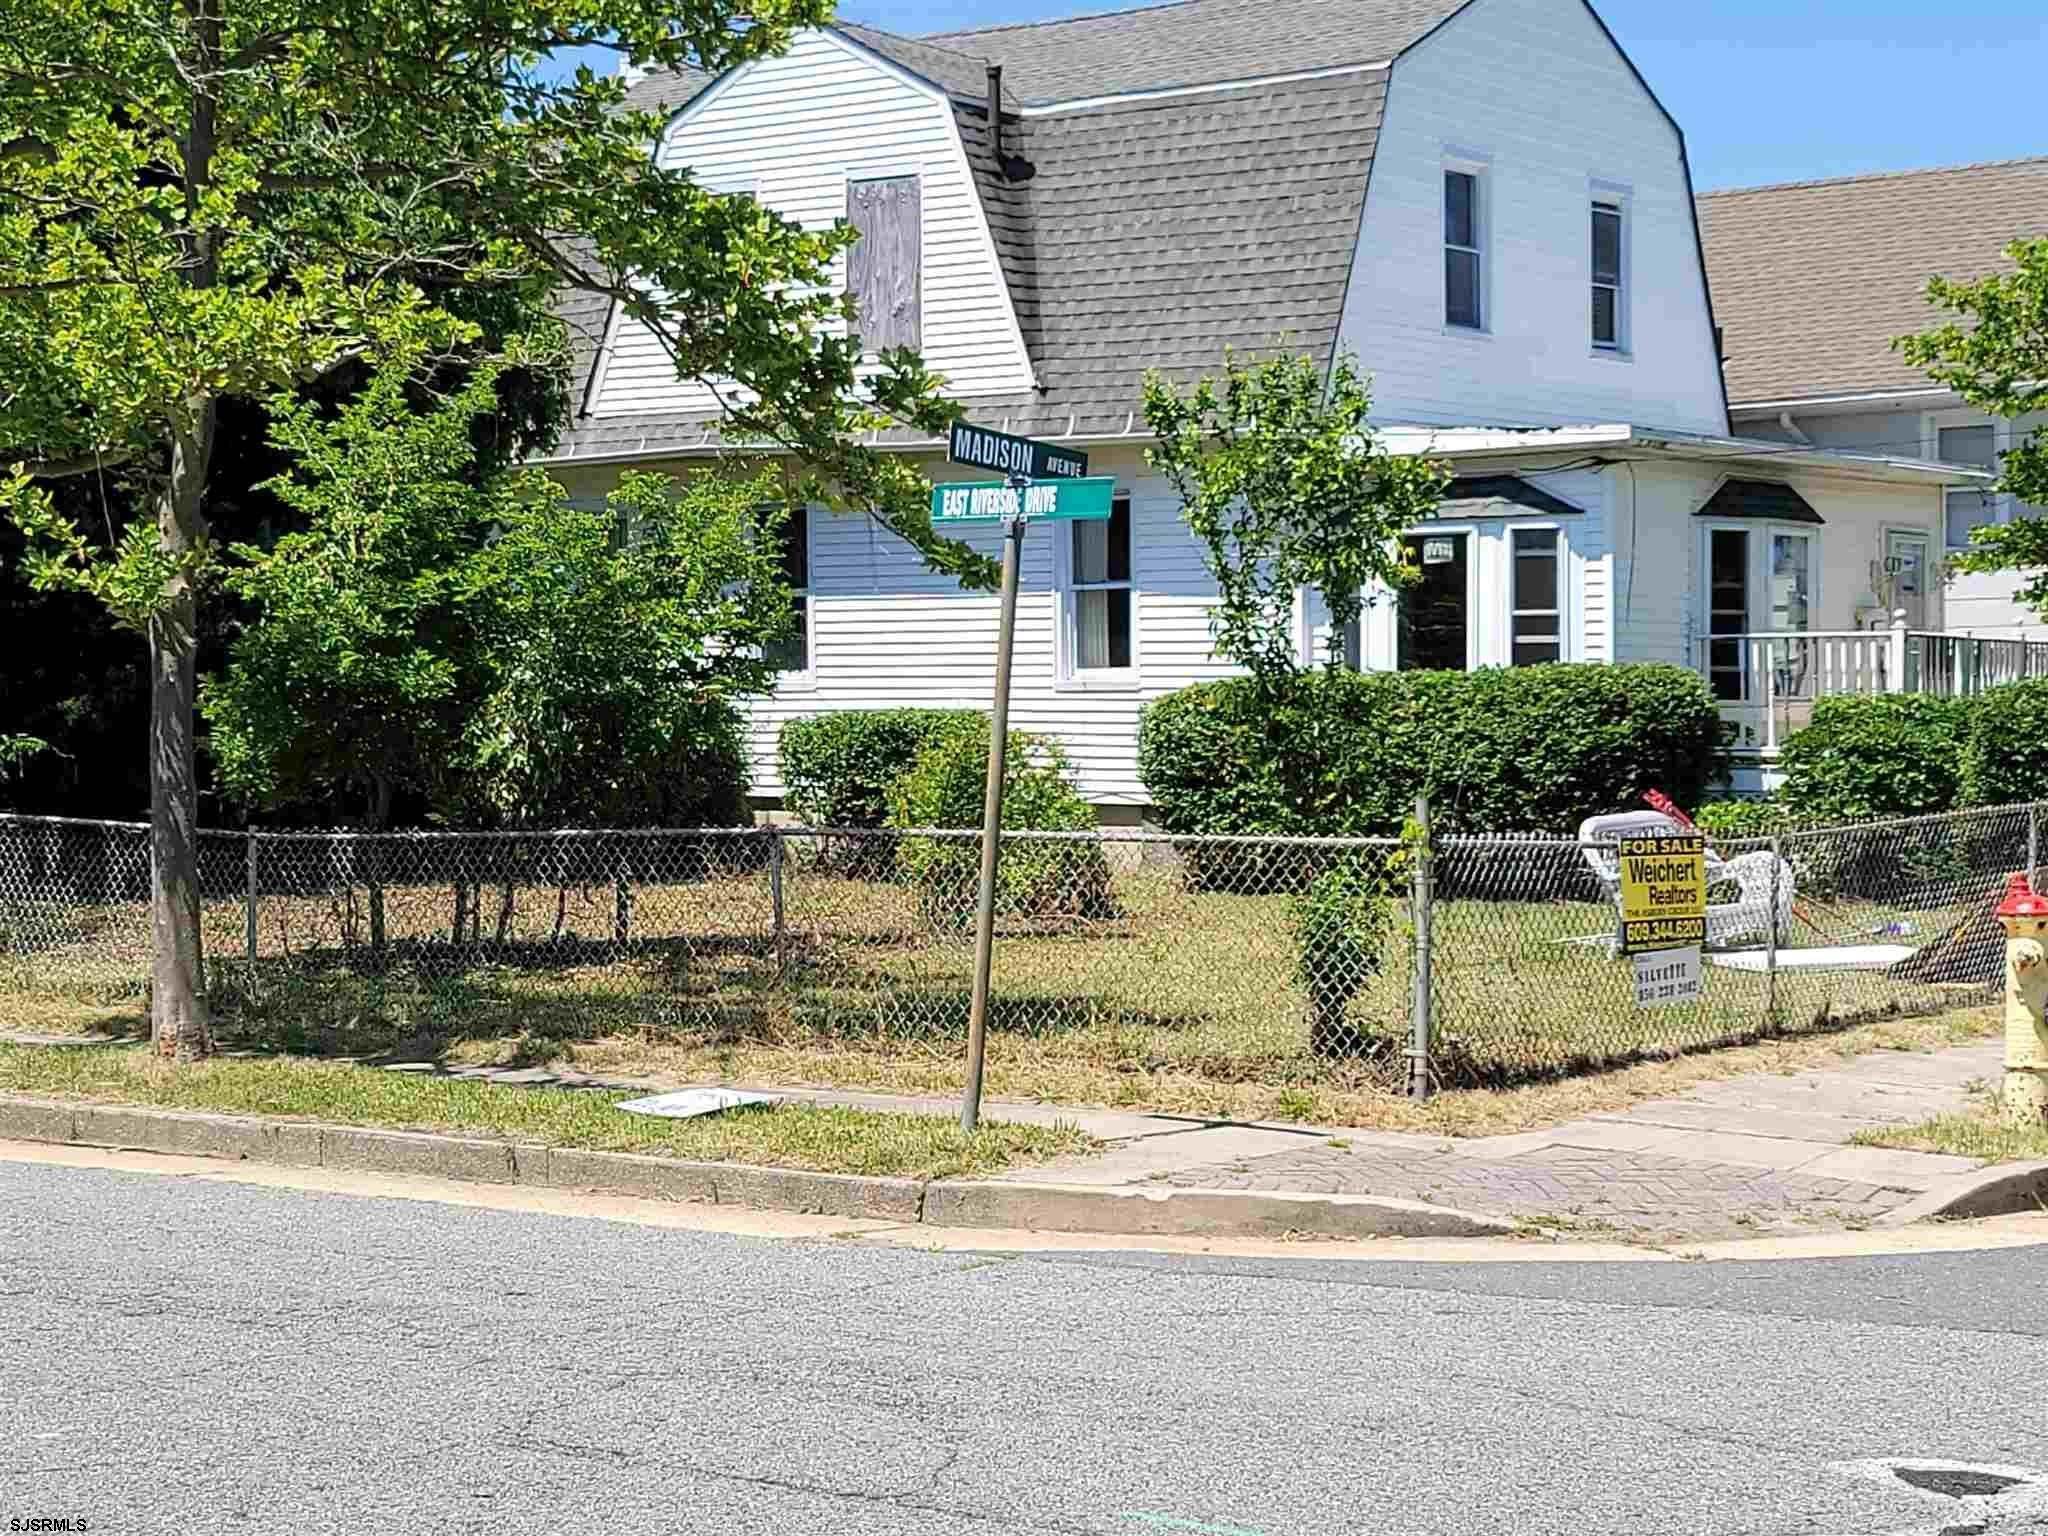 3. Land for Sale at 1404 Madison Avenue Avenue Atlantic City, New Jersey 08401 United States